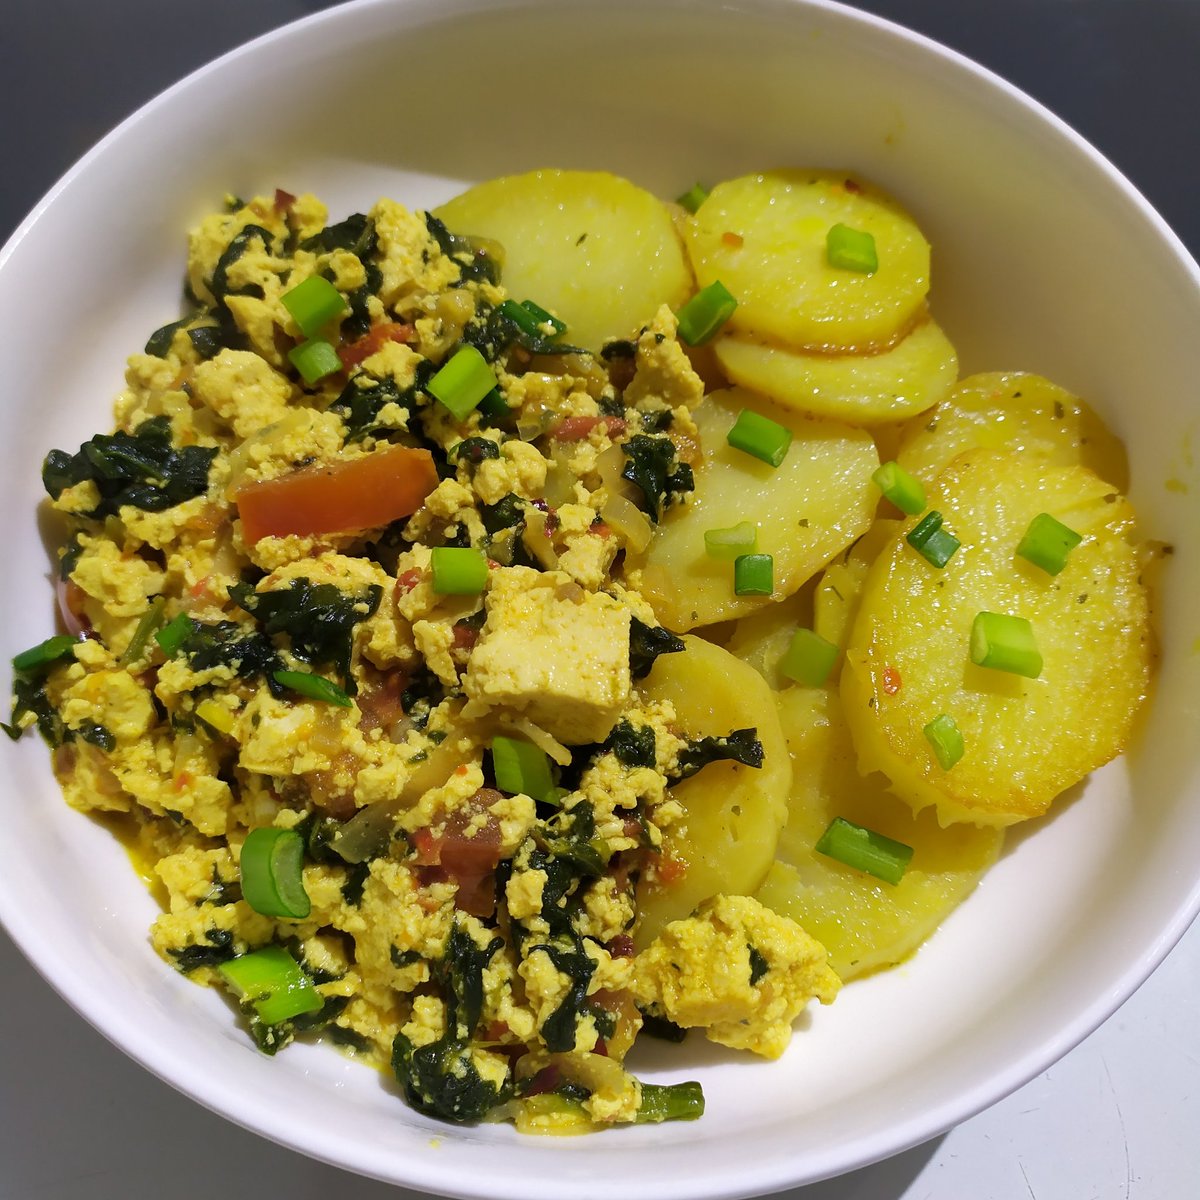 Brunch: spicy spinach & tomato scrambled tofu, with braised potatoes😋😋
A #vegan version of Nigerian spicy eggs and yam breakfasts I used to have on weekends as a kid, with potatoes standing in for the yam.
#ComfortFood #Delicious #FoodMemories